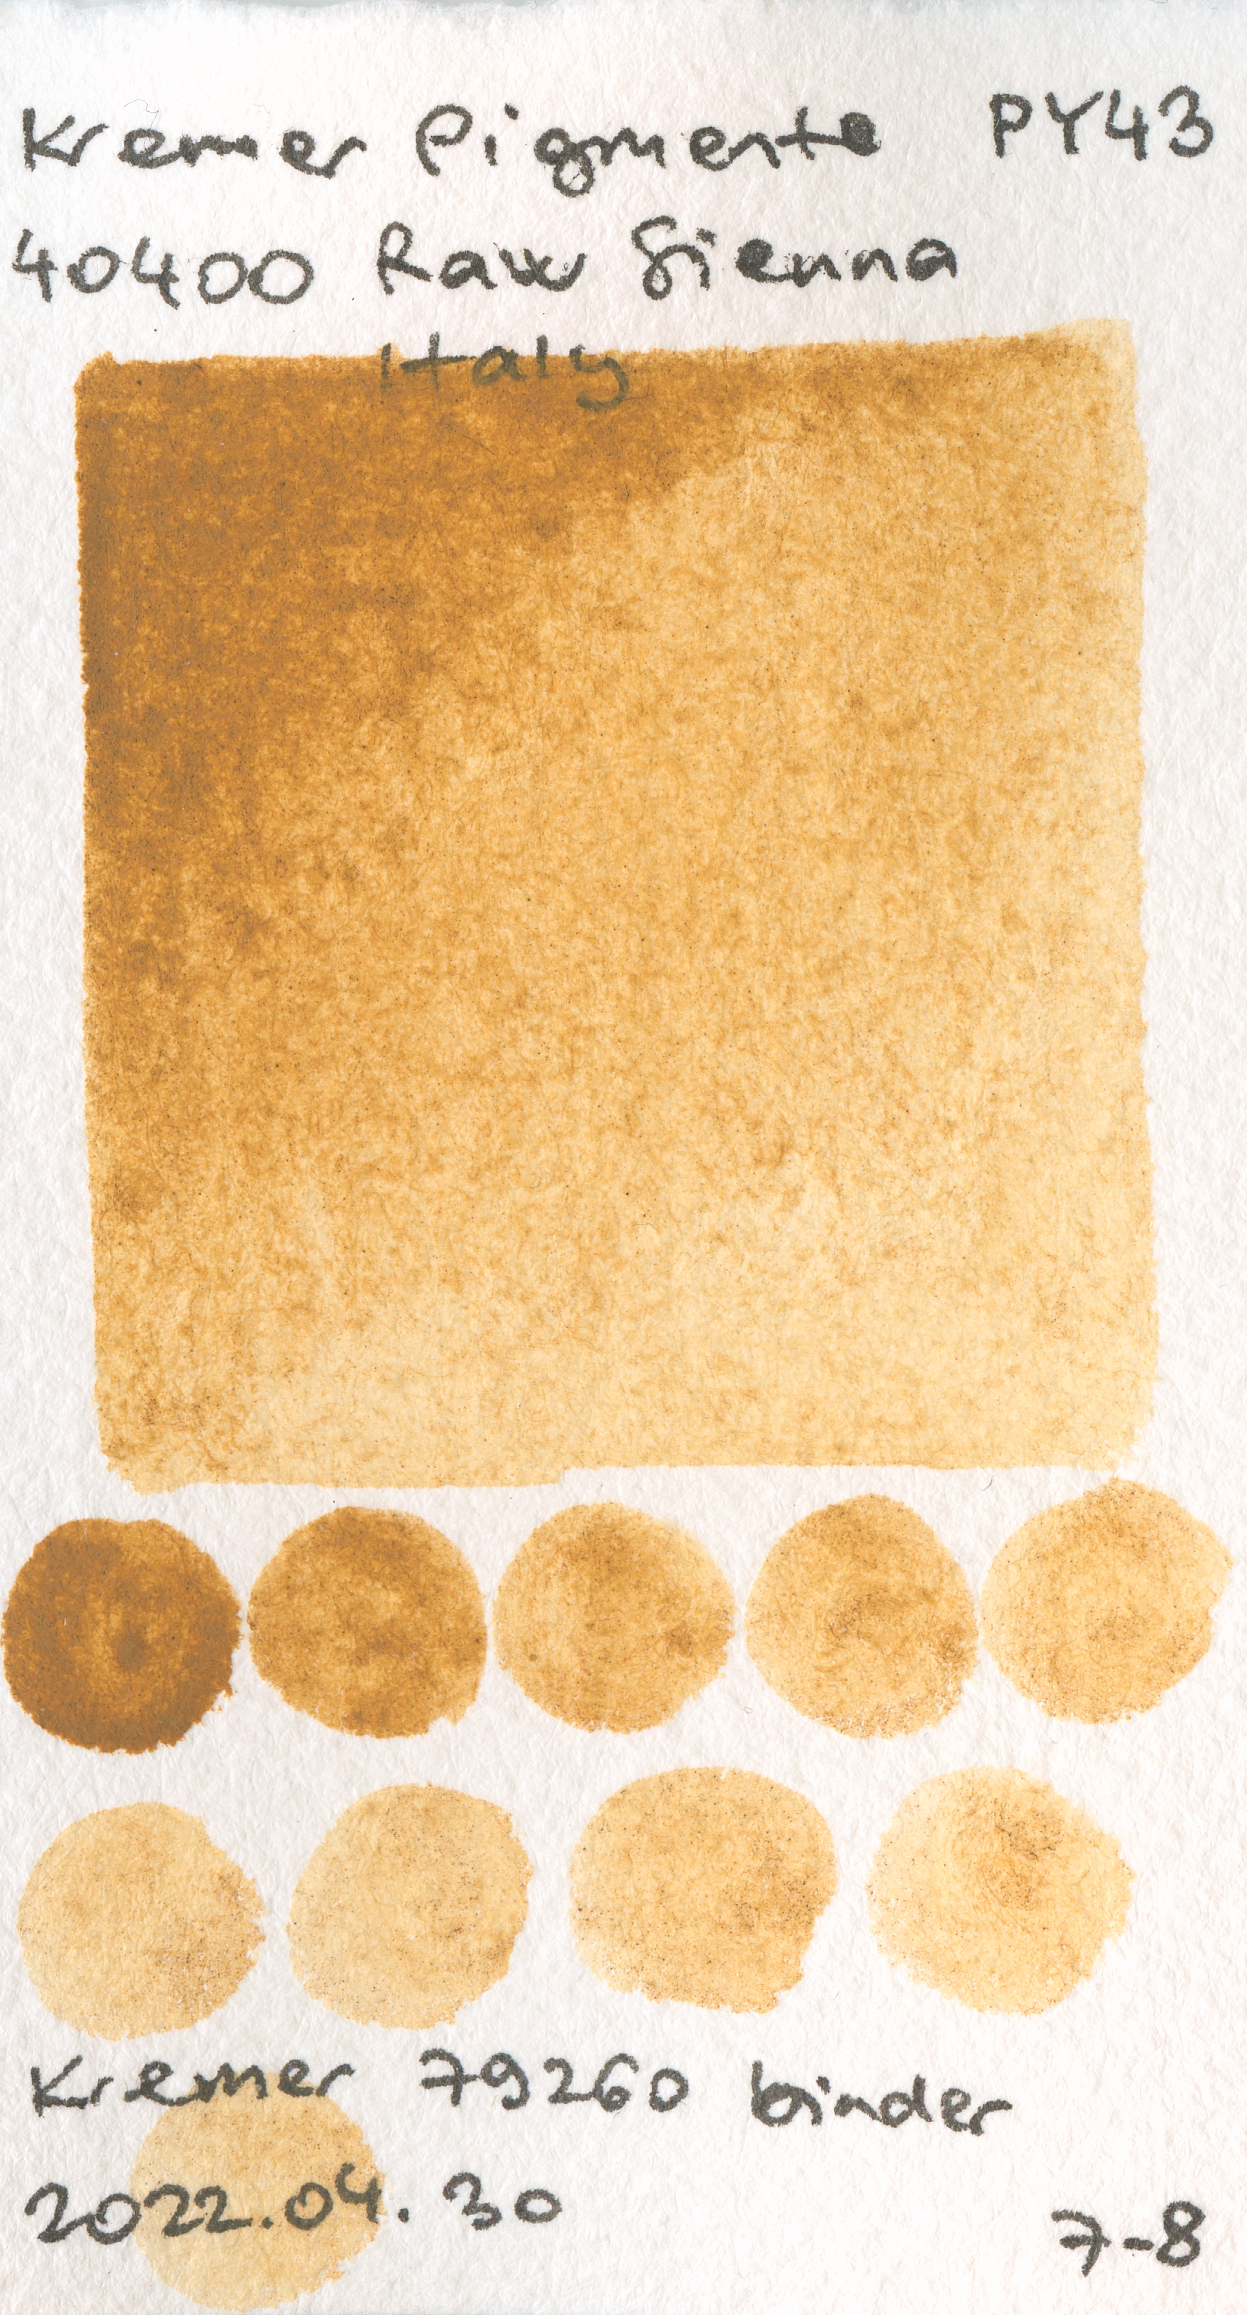 Kremer Pigmente [Dry] Pigments 40400 Raw Sienna, Italy PY43 watercolor swatch